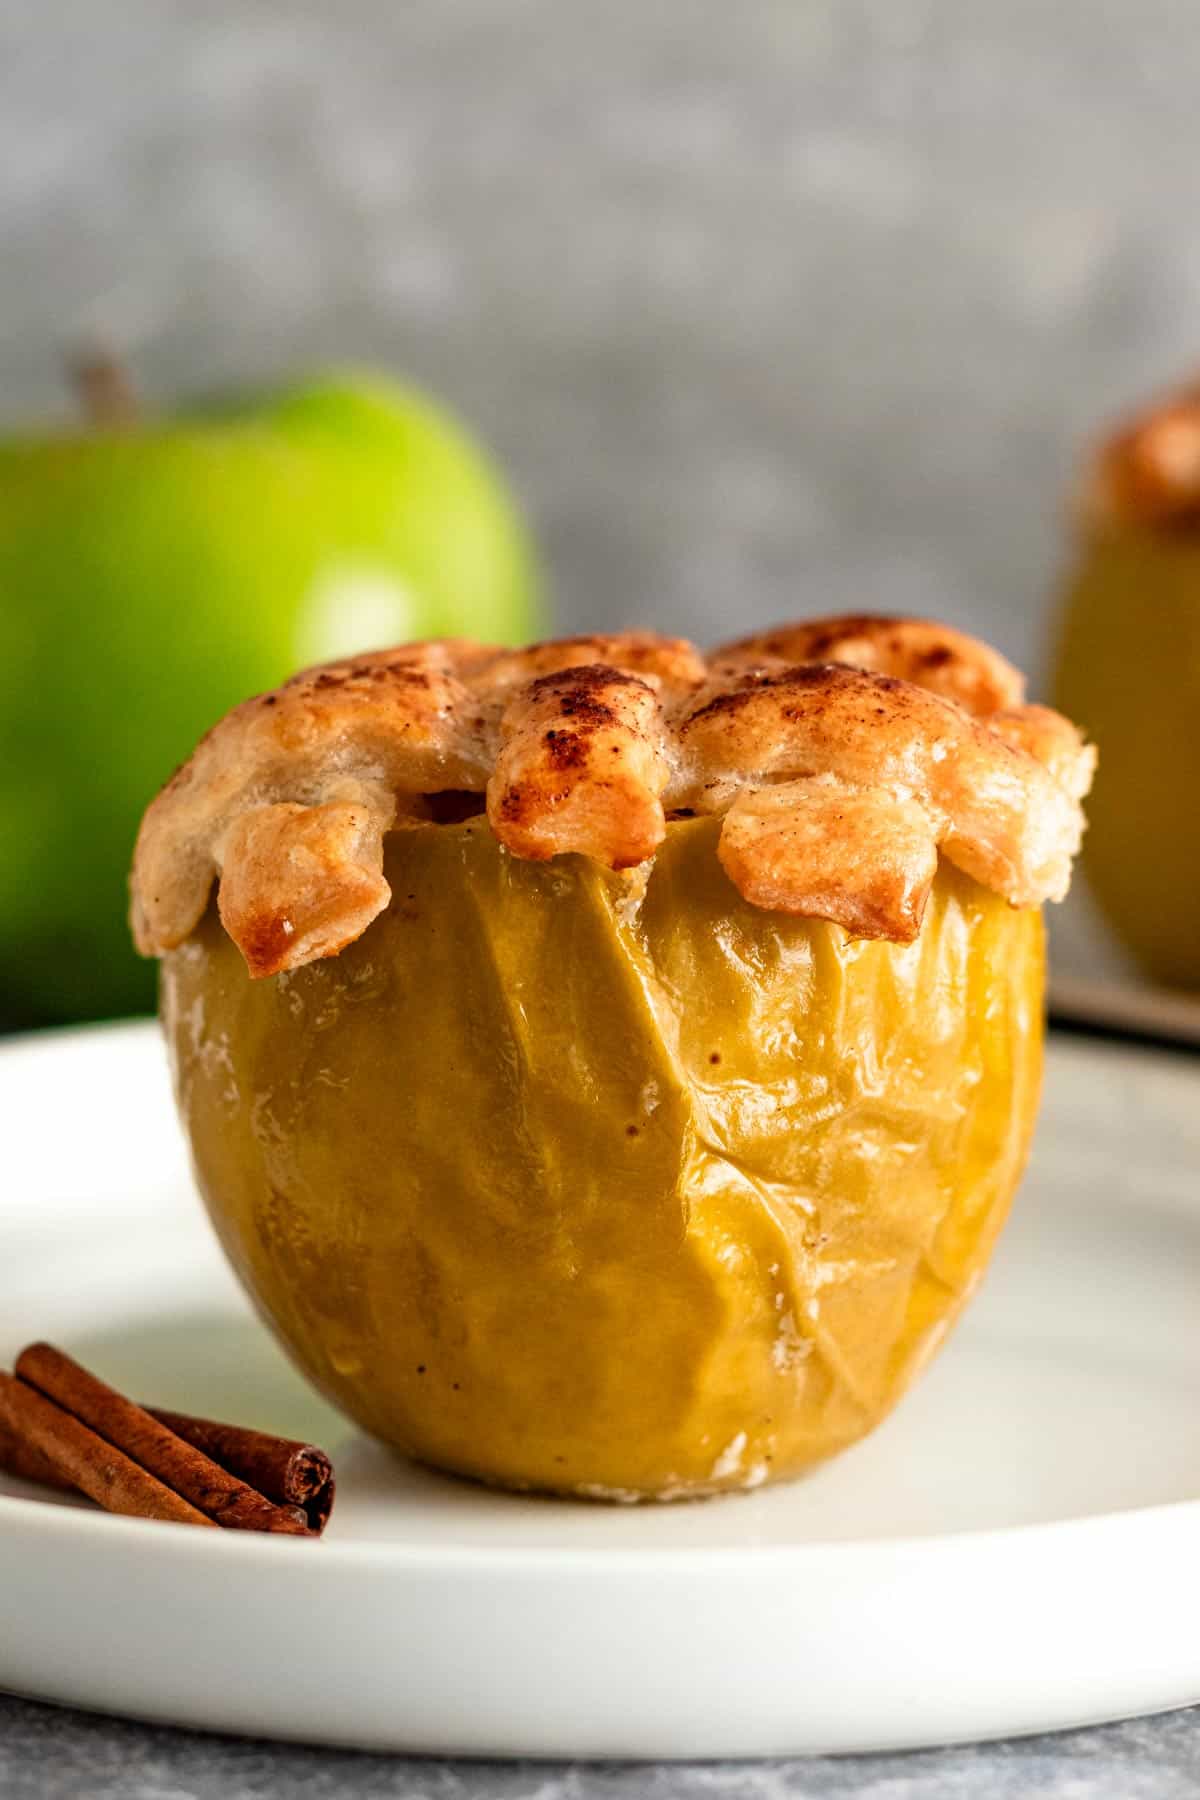 baked green apple on a plate with golden brown dough topping.